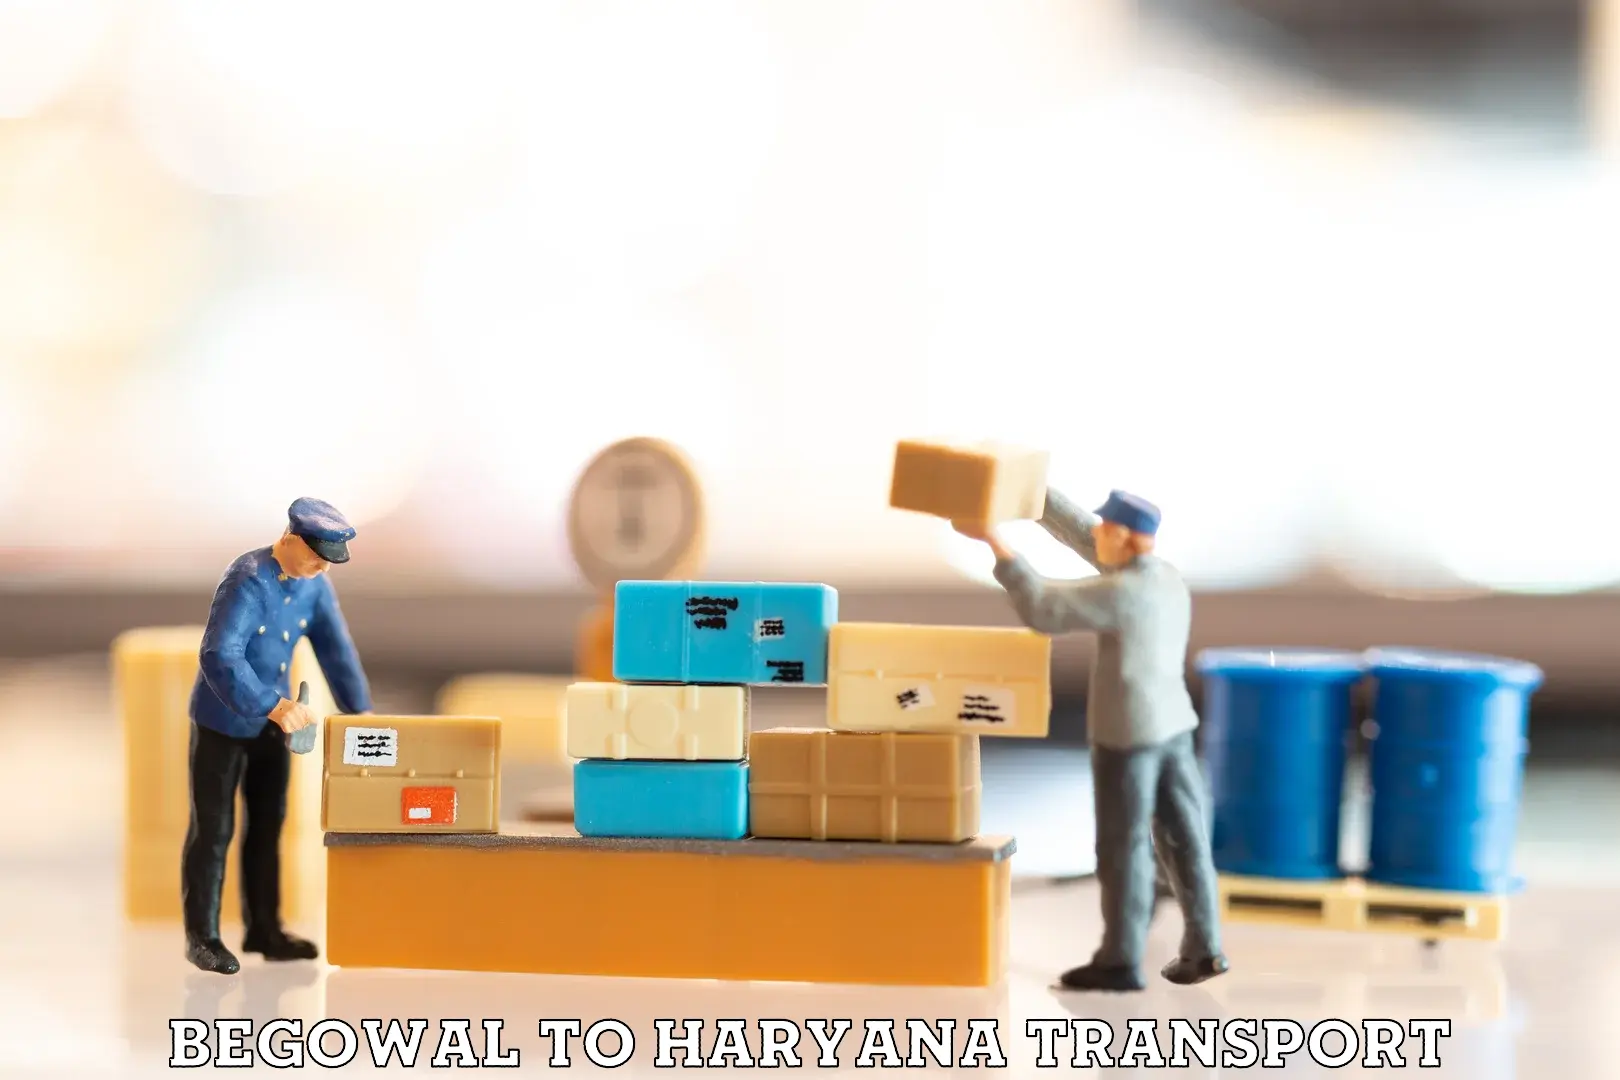 Lorry transport service Begowal to Gurgaon